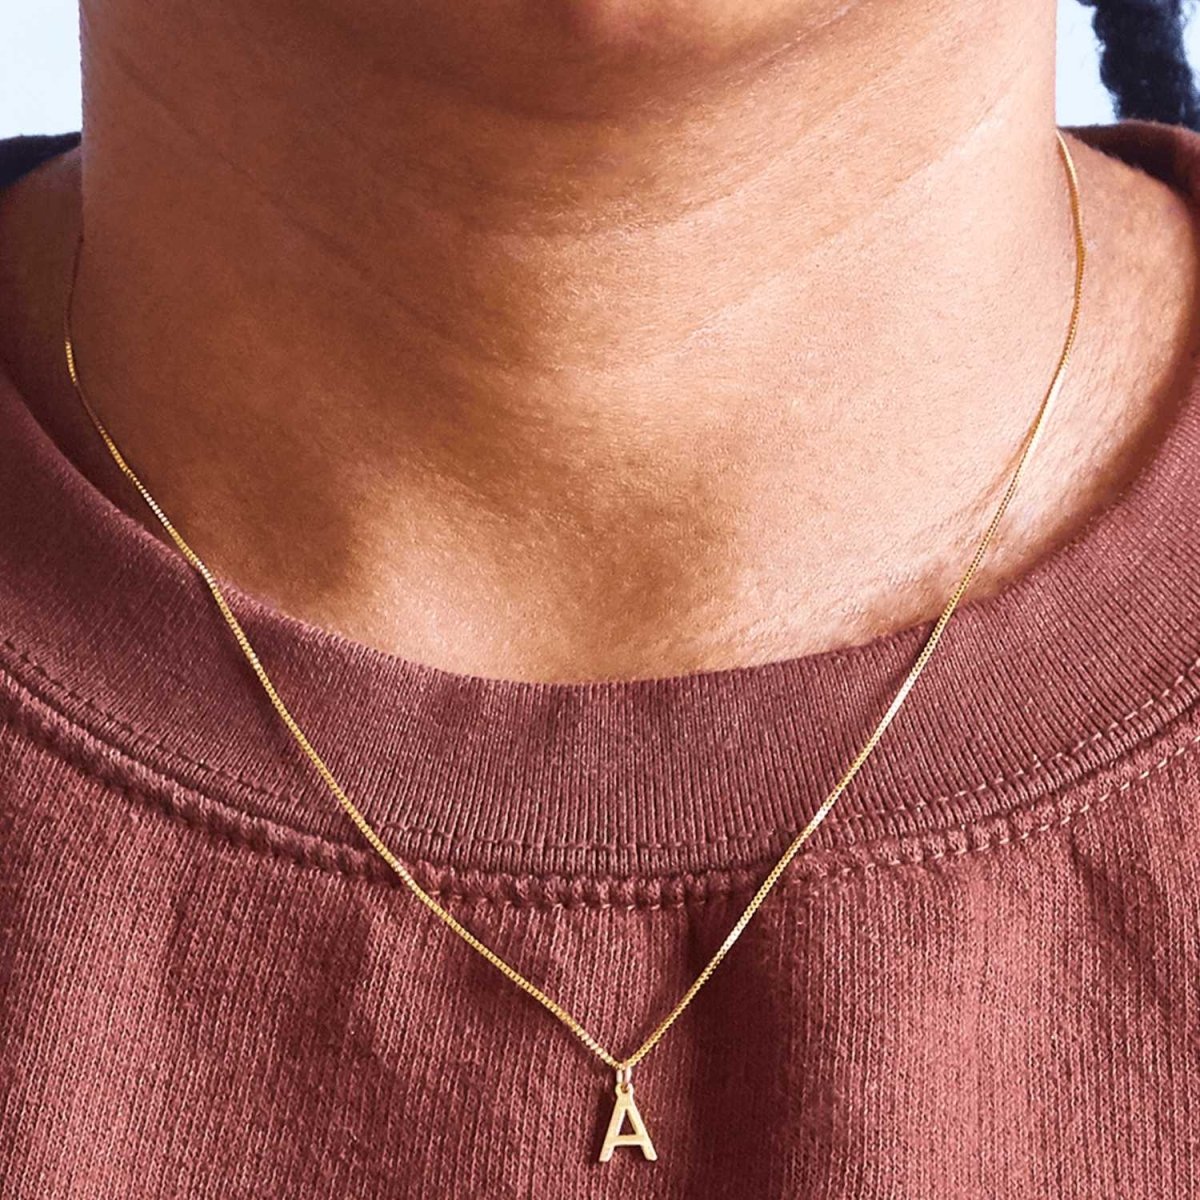 14K GOLD INITIAL NECKLACE